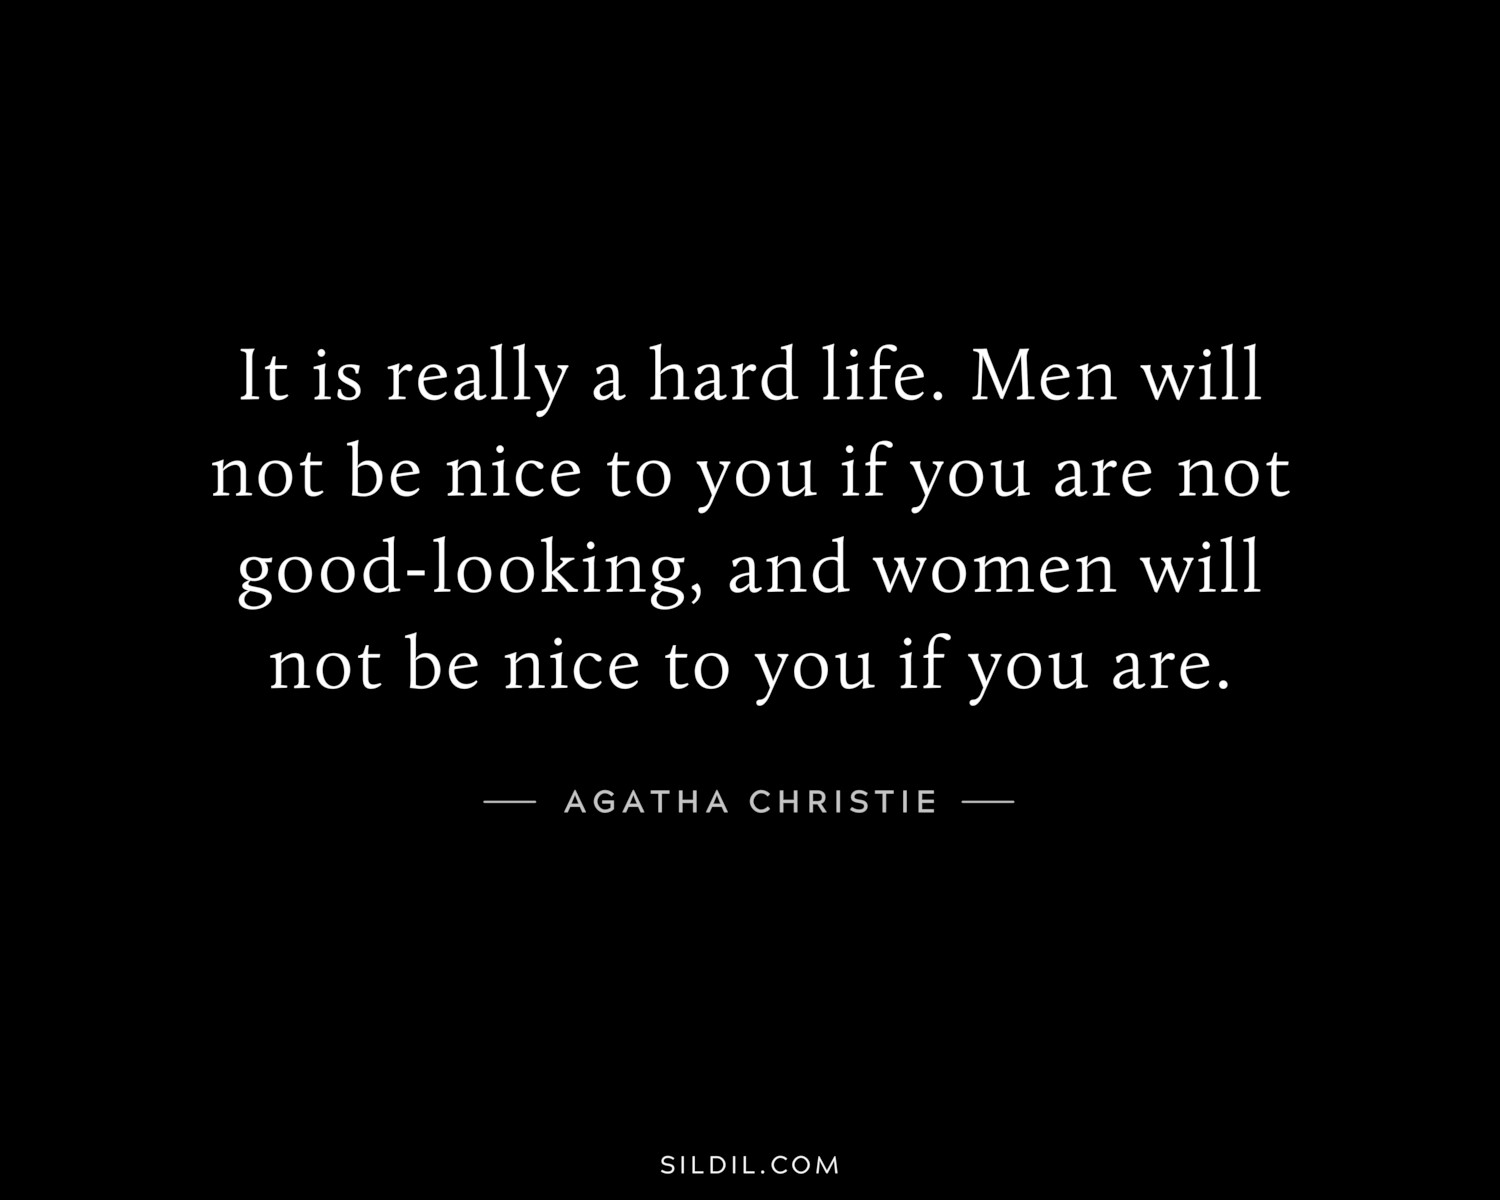 It is really a hard life. Men will not be nice to you if you are not good-looking, and women will not be nice to you if you are.